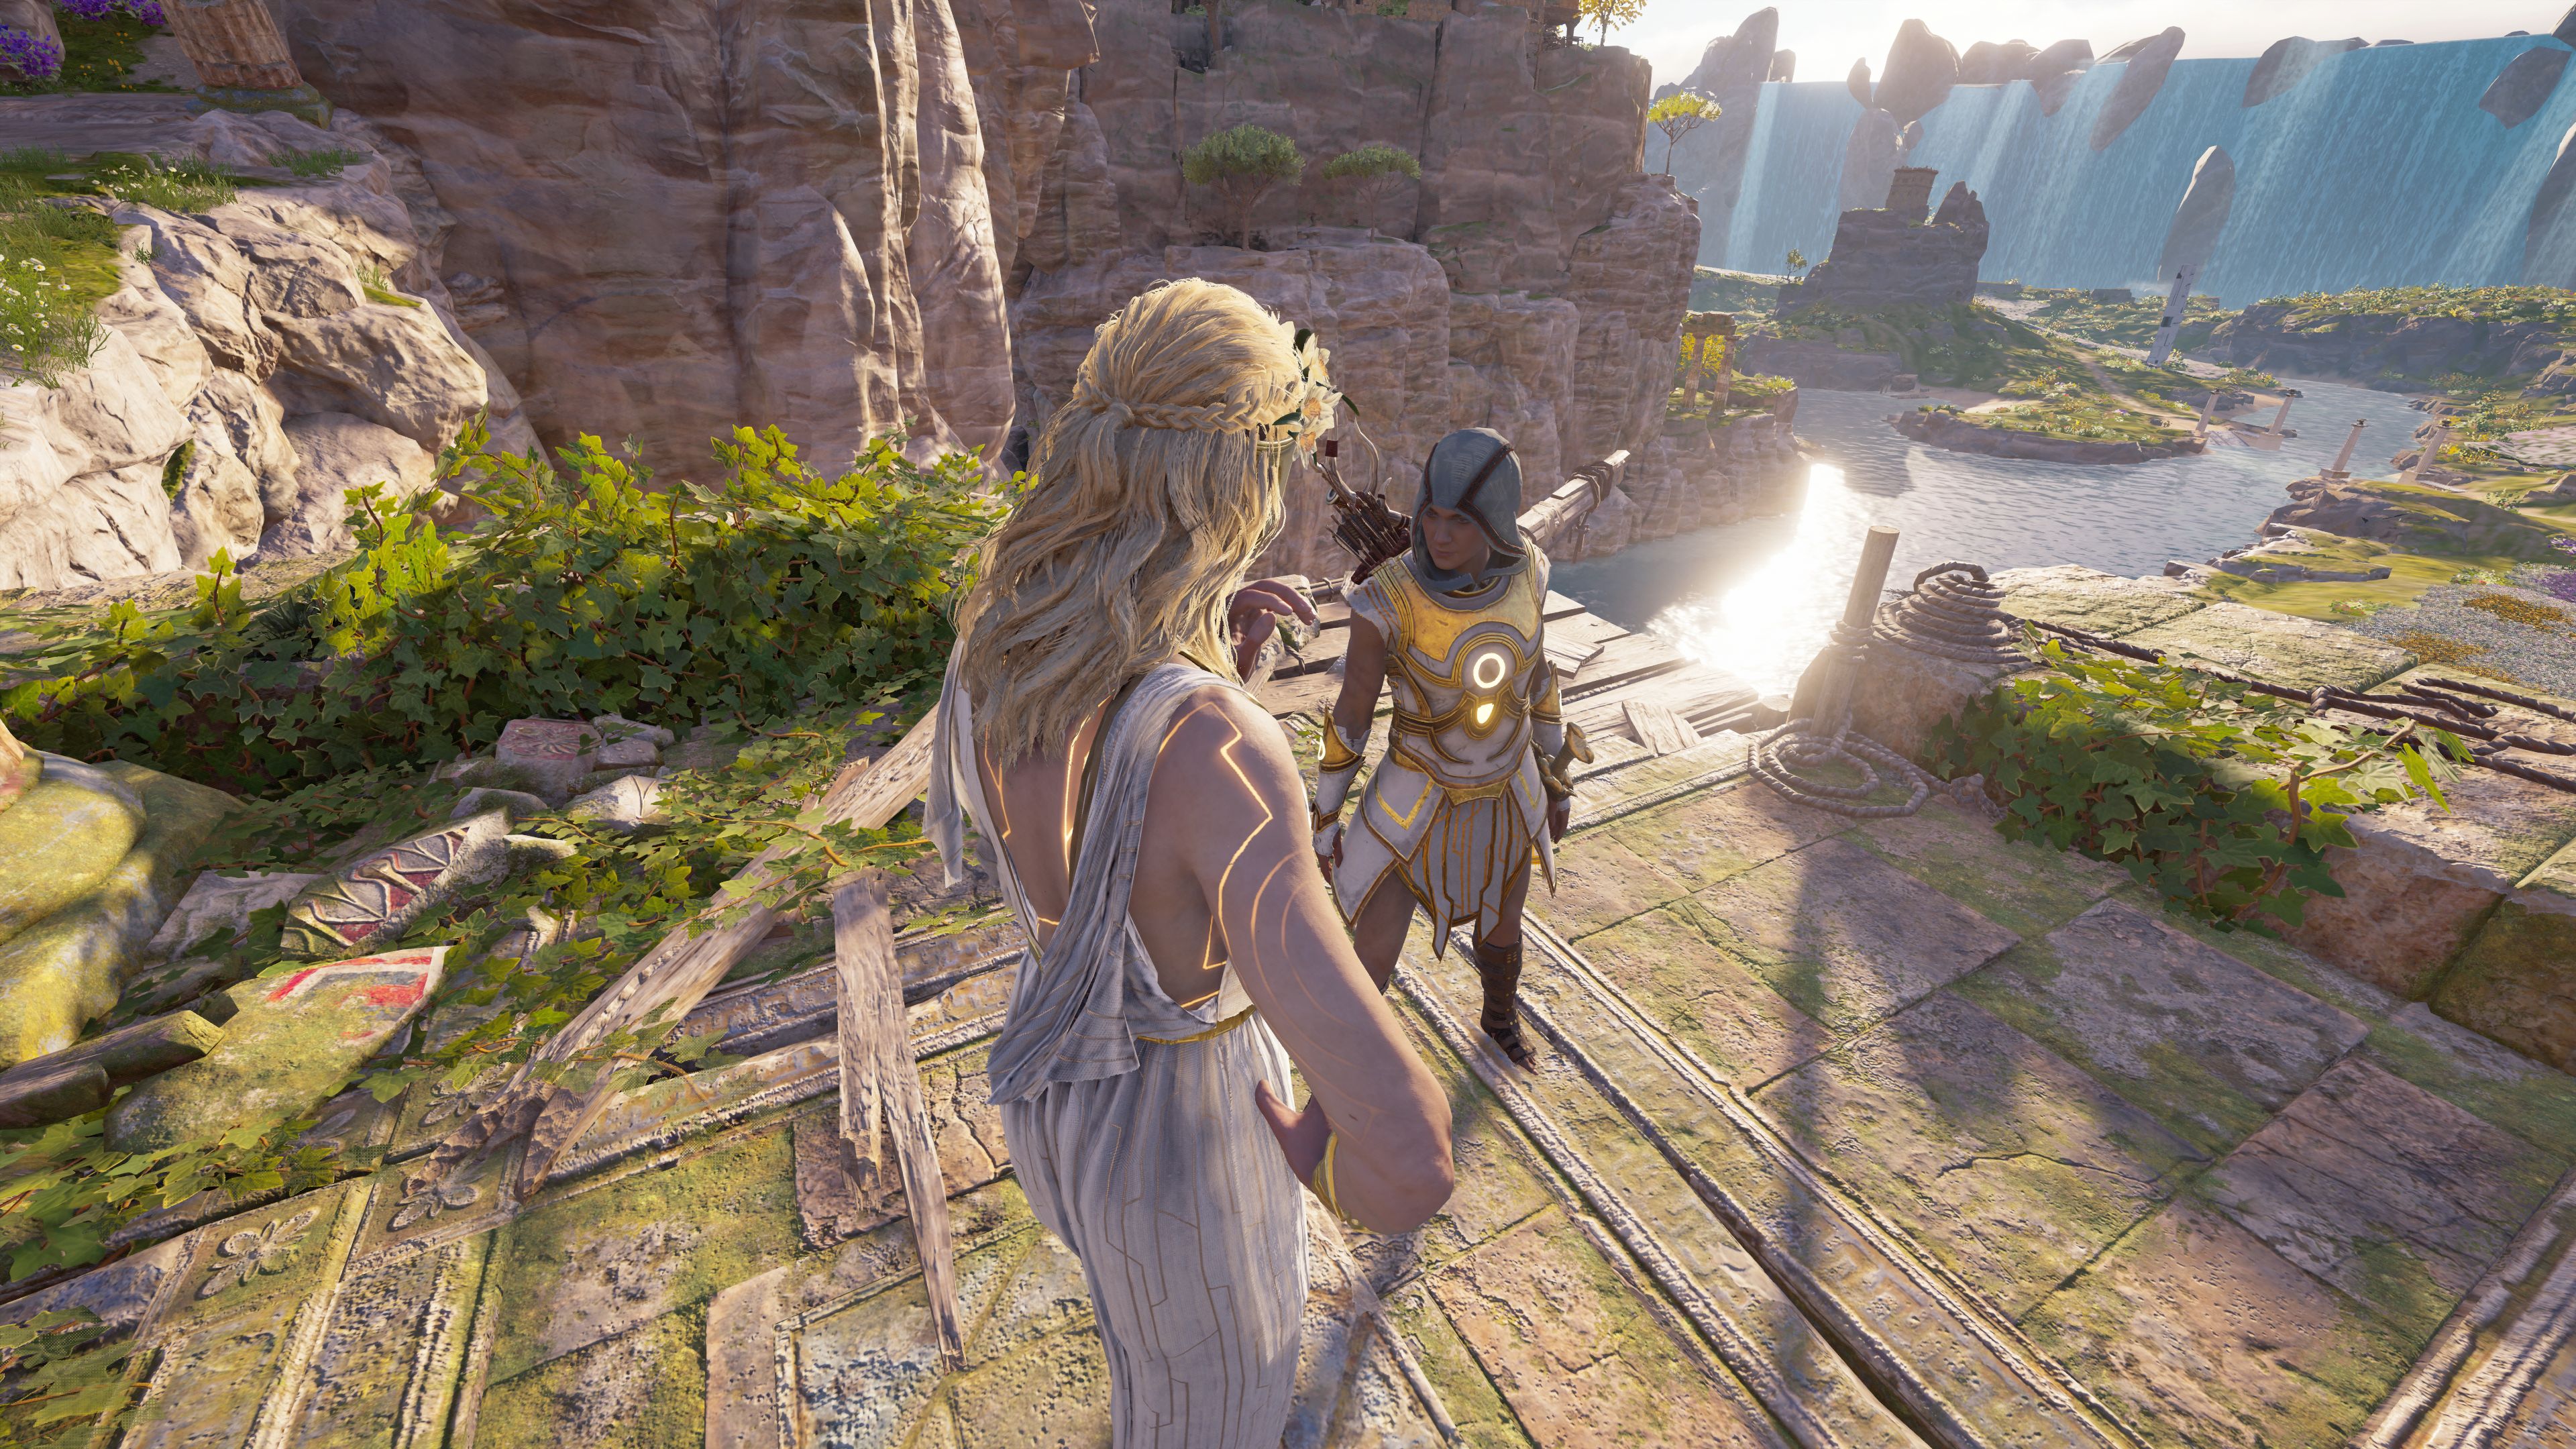 May 25 Part two of Assassin's Creed Odyssey's Fate of Atlantis DLC